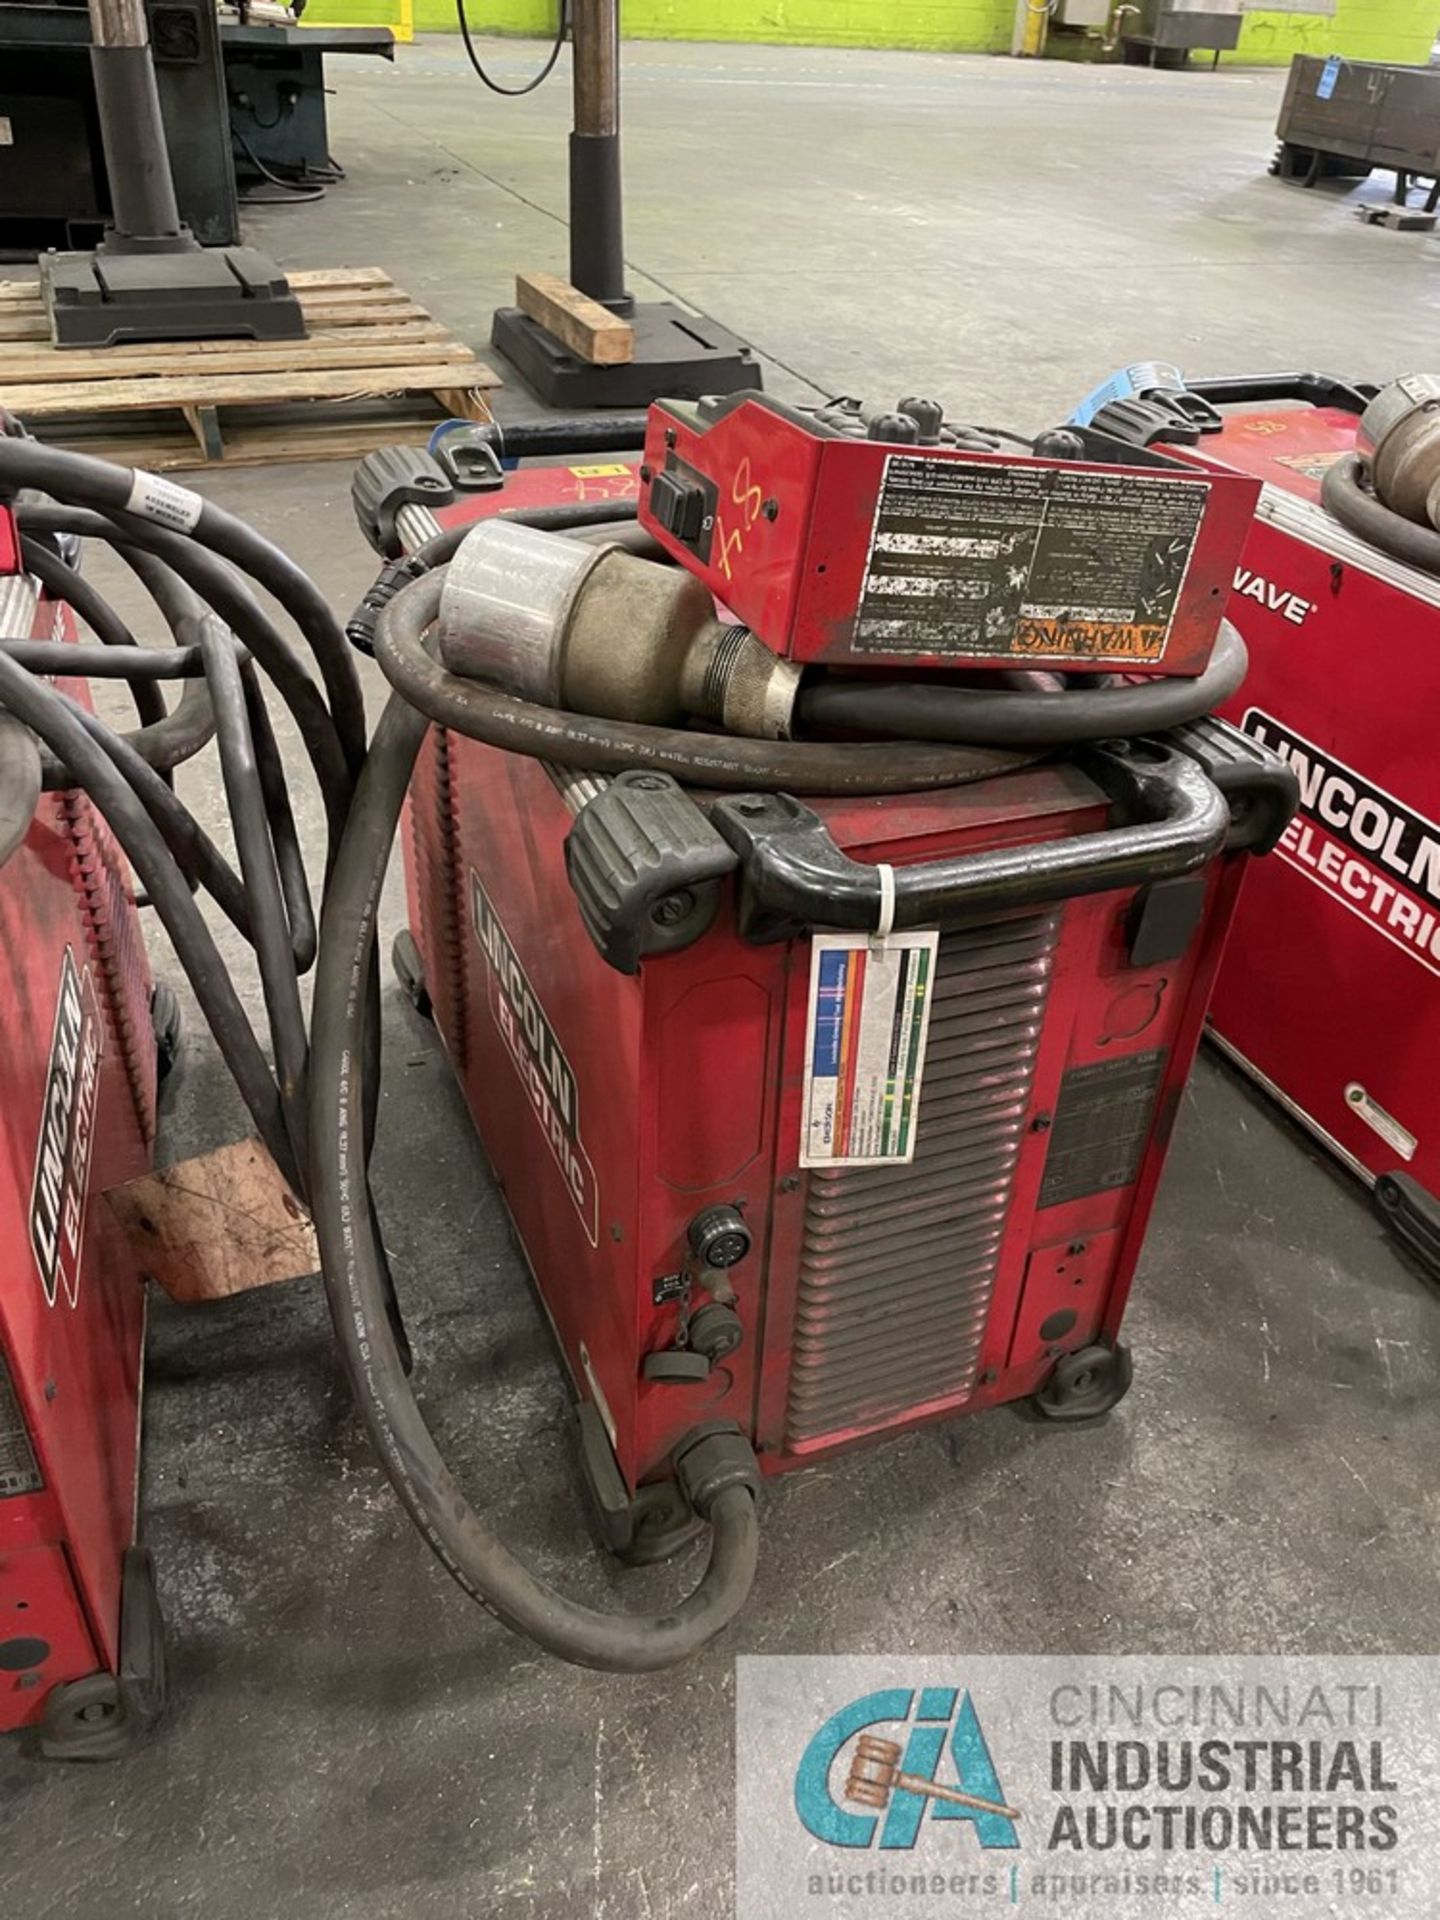 350 AMP LINCOLN S350 POWER WAVE ADVANCED PROCESS WELDER S/N U1130706851, WITH POWER FEED - Image 2 of 5